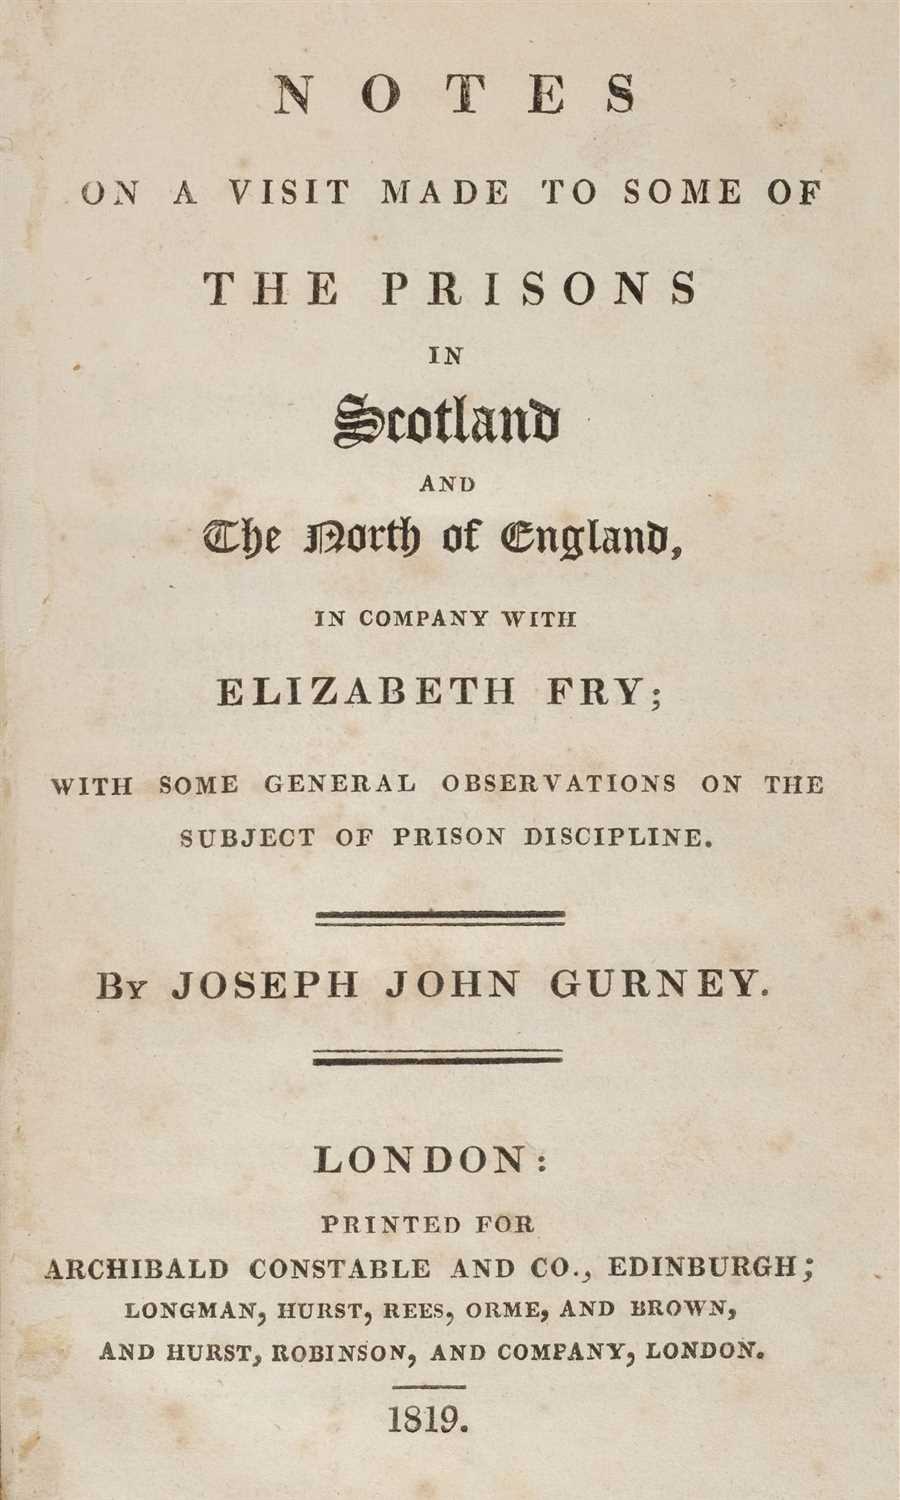 Lot 354 - Gurney (Joseph John). A Visit Made to Some of the Prisons in Scotland and the North of England, 1819